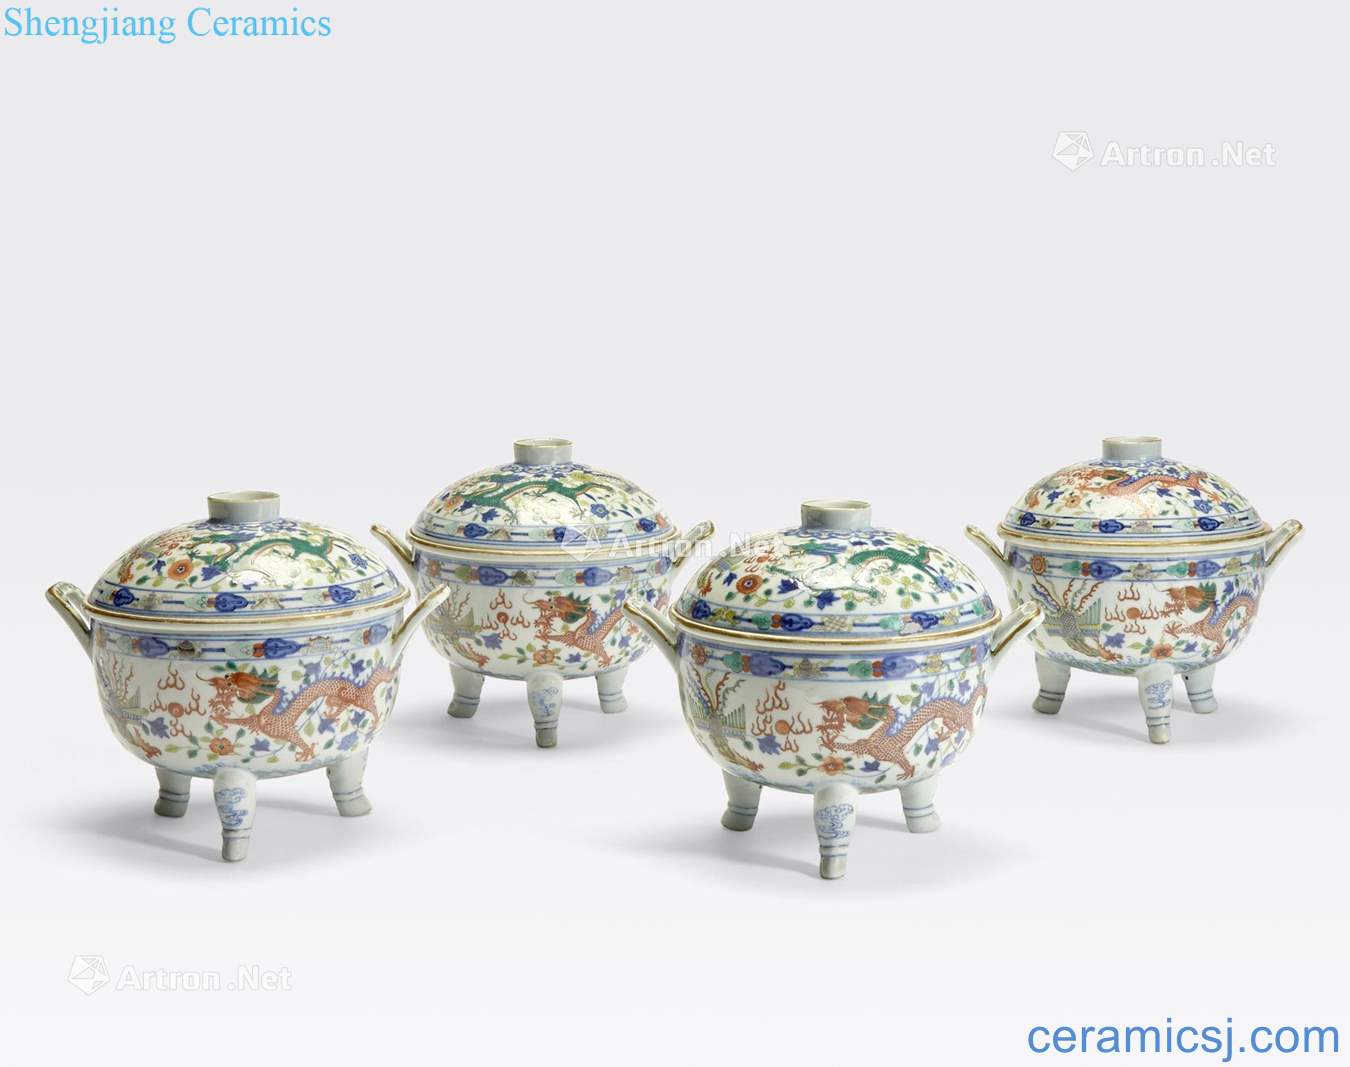 Guangxu six - character marks and of the period of A GROUP of FOUR MATCHING WUCAI ENAMELED PORCELAIN COVERED FOOD WARMERS WITH LINERS